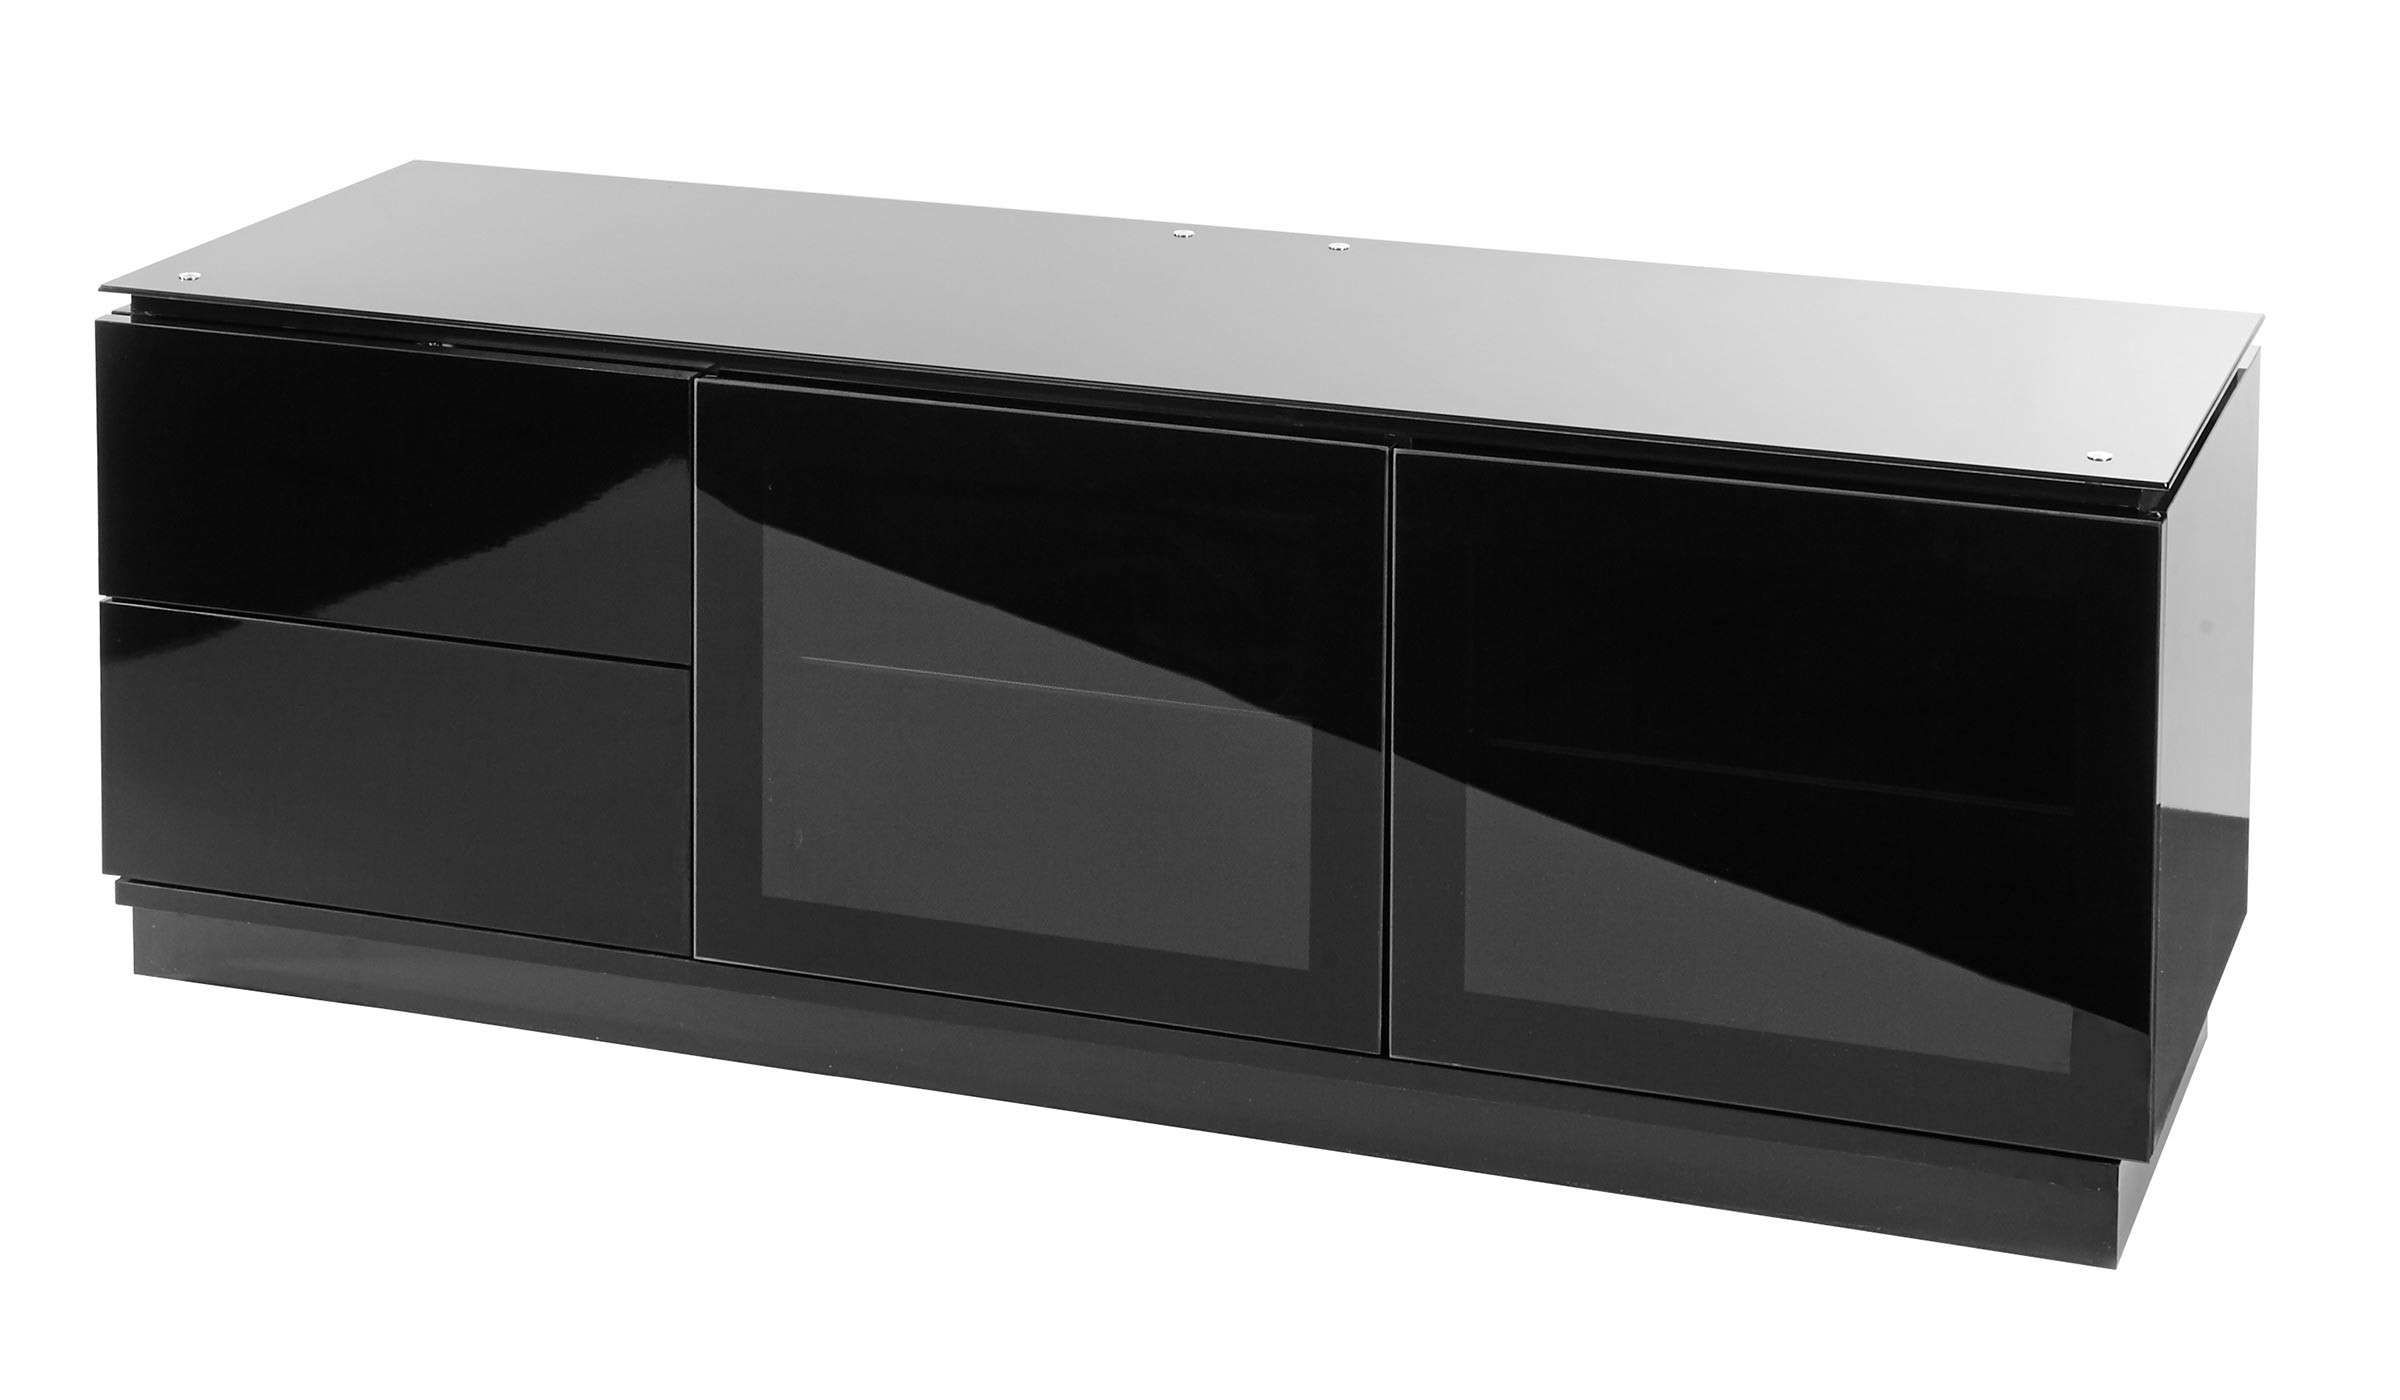 Black Gloss Tv Cabinet Up To 65" Tv | Casino Mmt C1500b In Black Tv Cabinets With Drawers (View 18 of 20)